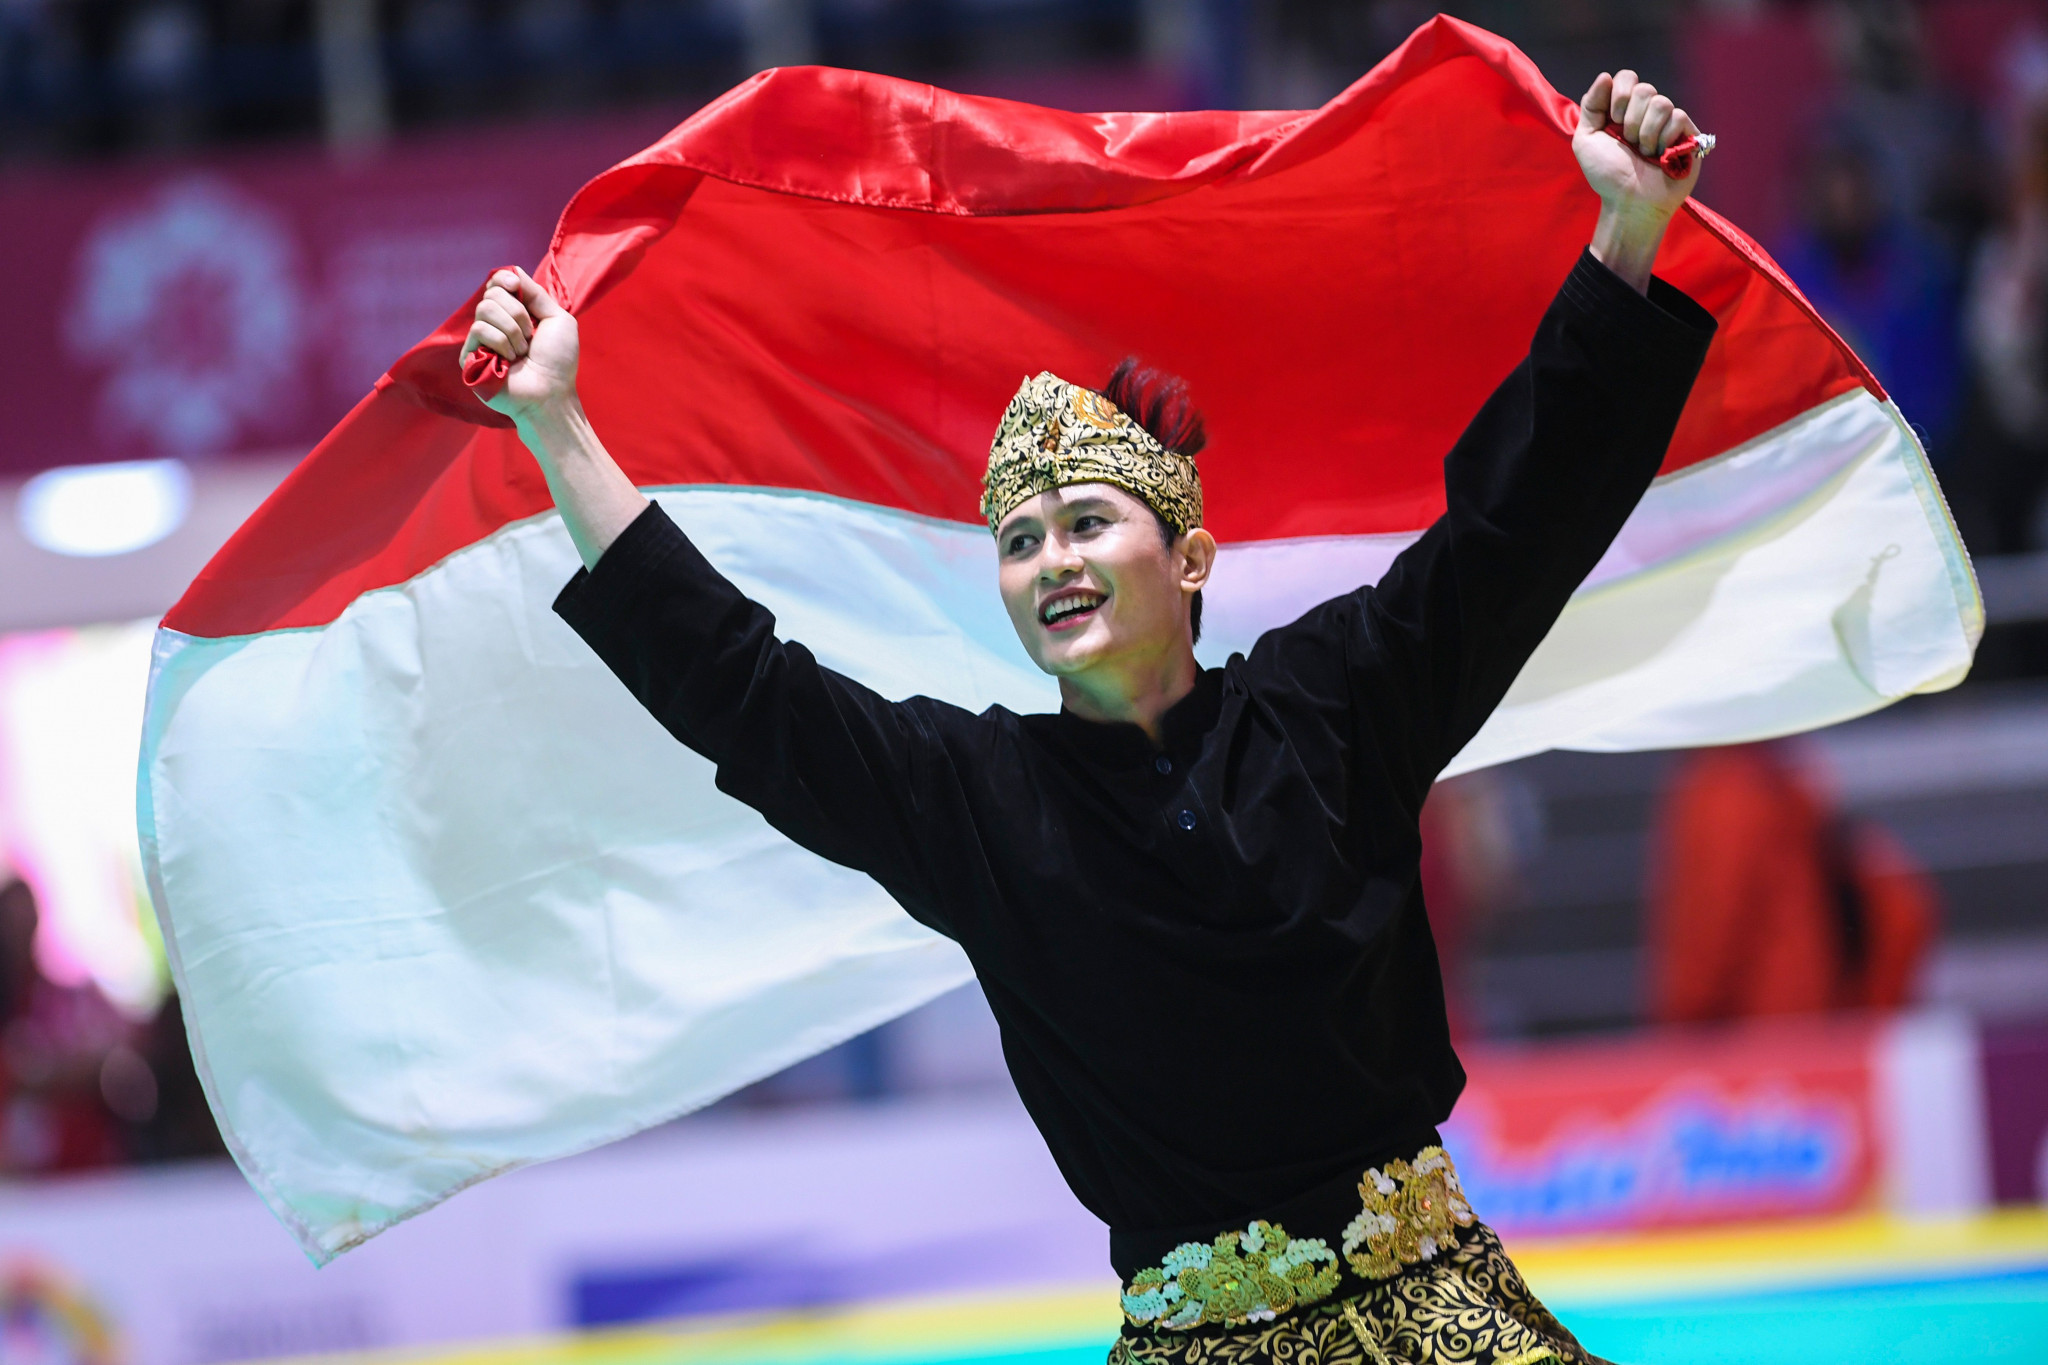 Sugianto Sugianto won one of Indonesia's six pencak silat golds today in the men's single event. The hosts won 14 of the 16 golds on offer in the sport, meaning they now have 30 overall ©Getty Images